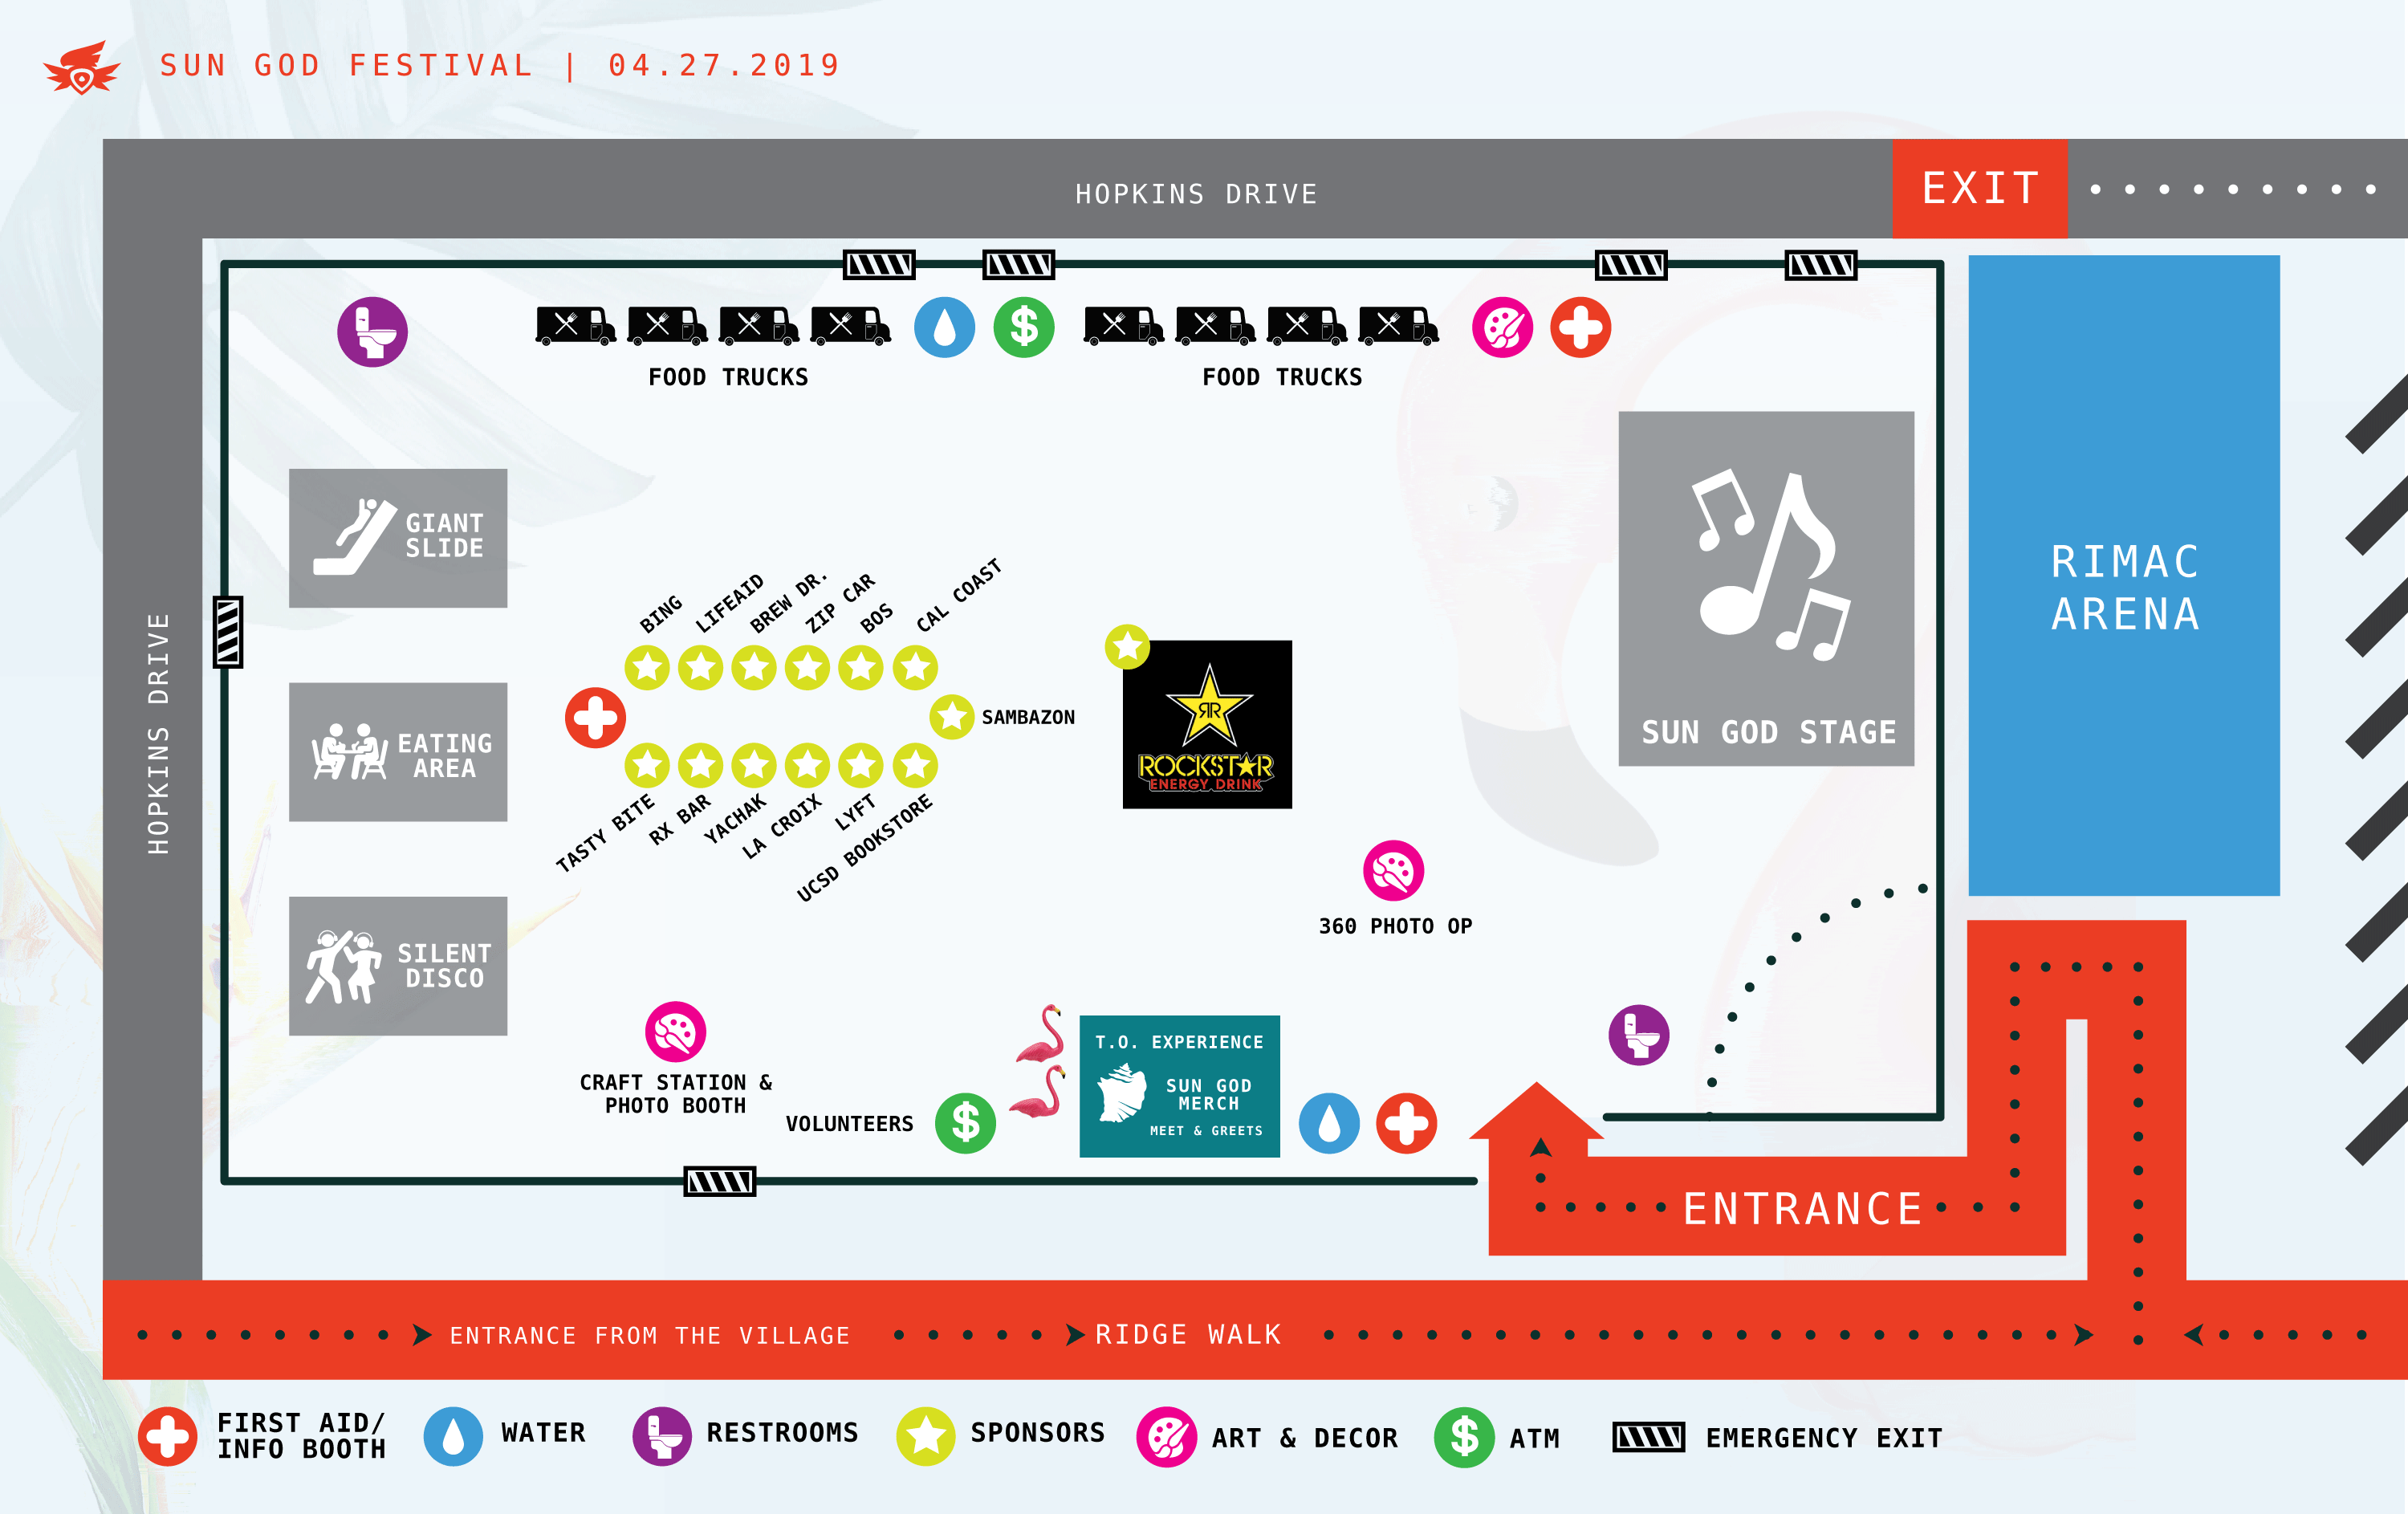 Cannot load festival map. Try again.